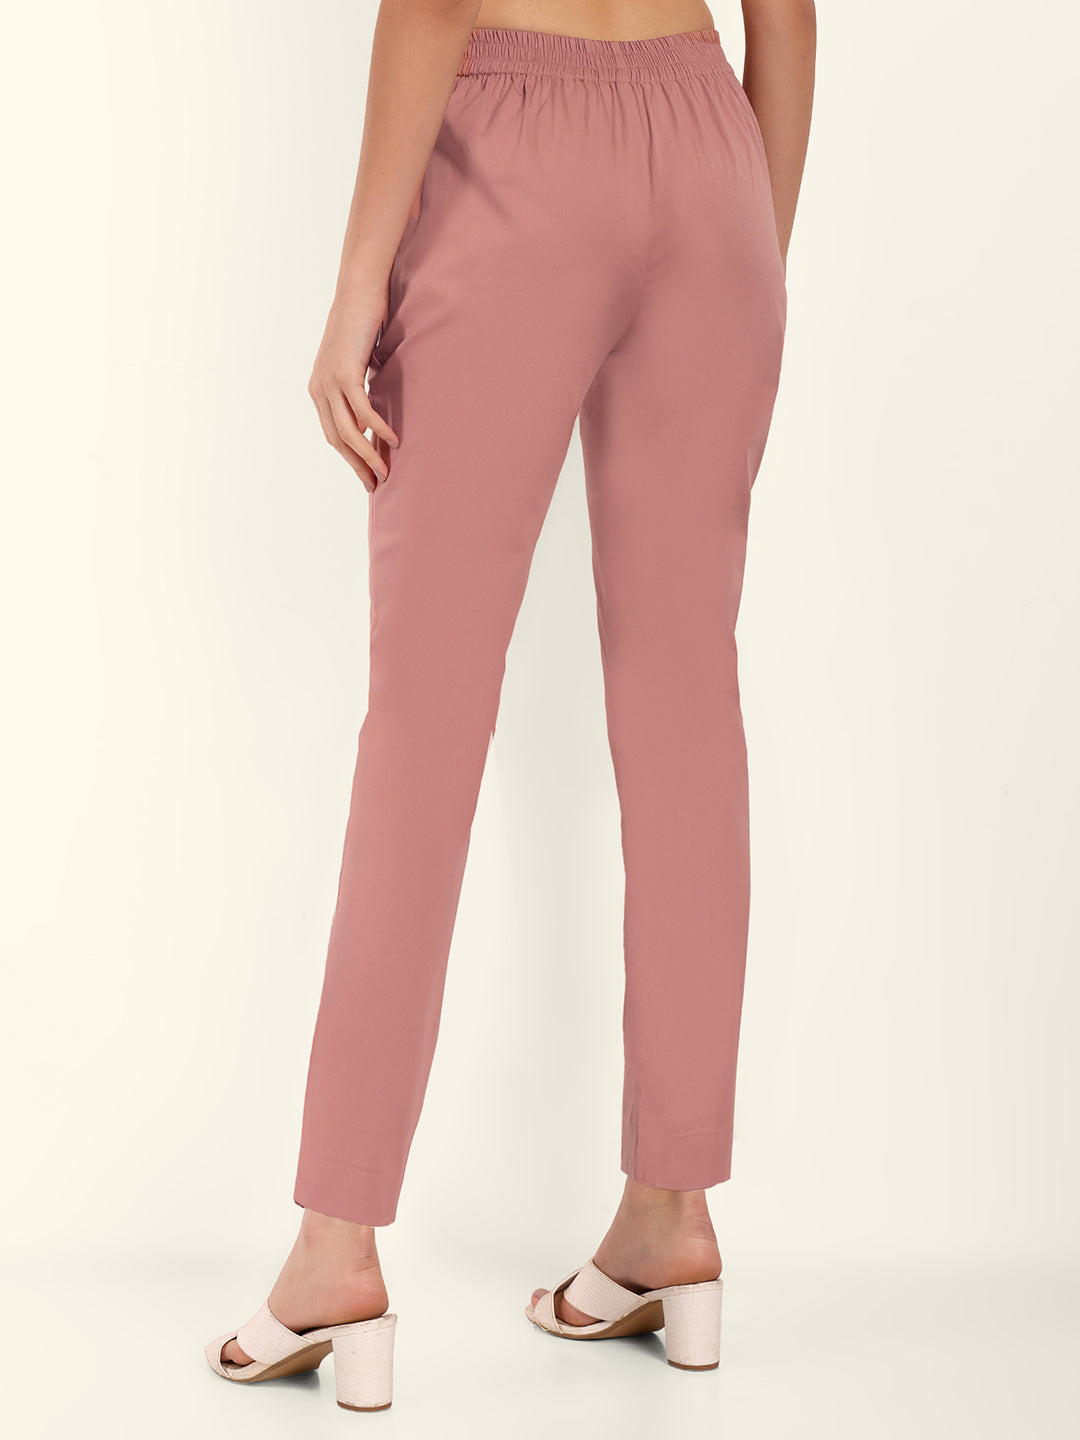 Naariy Dusty Pink Stretchable Cotton Pant